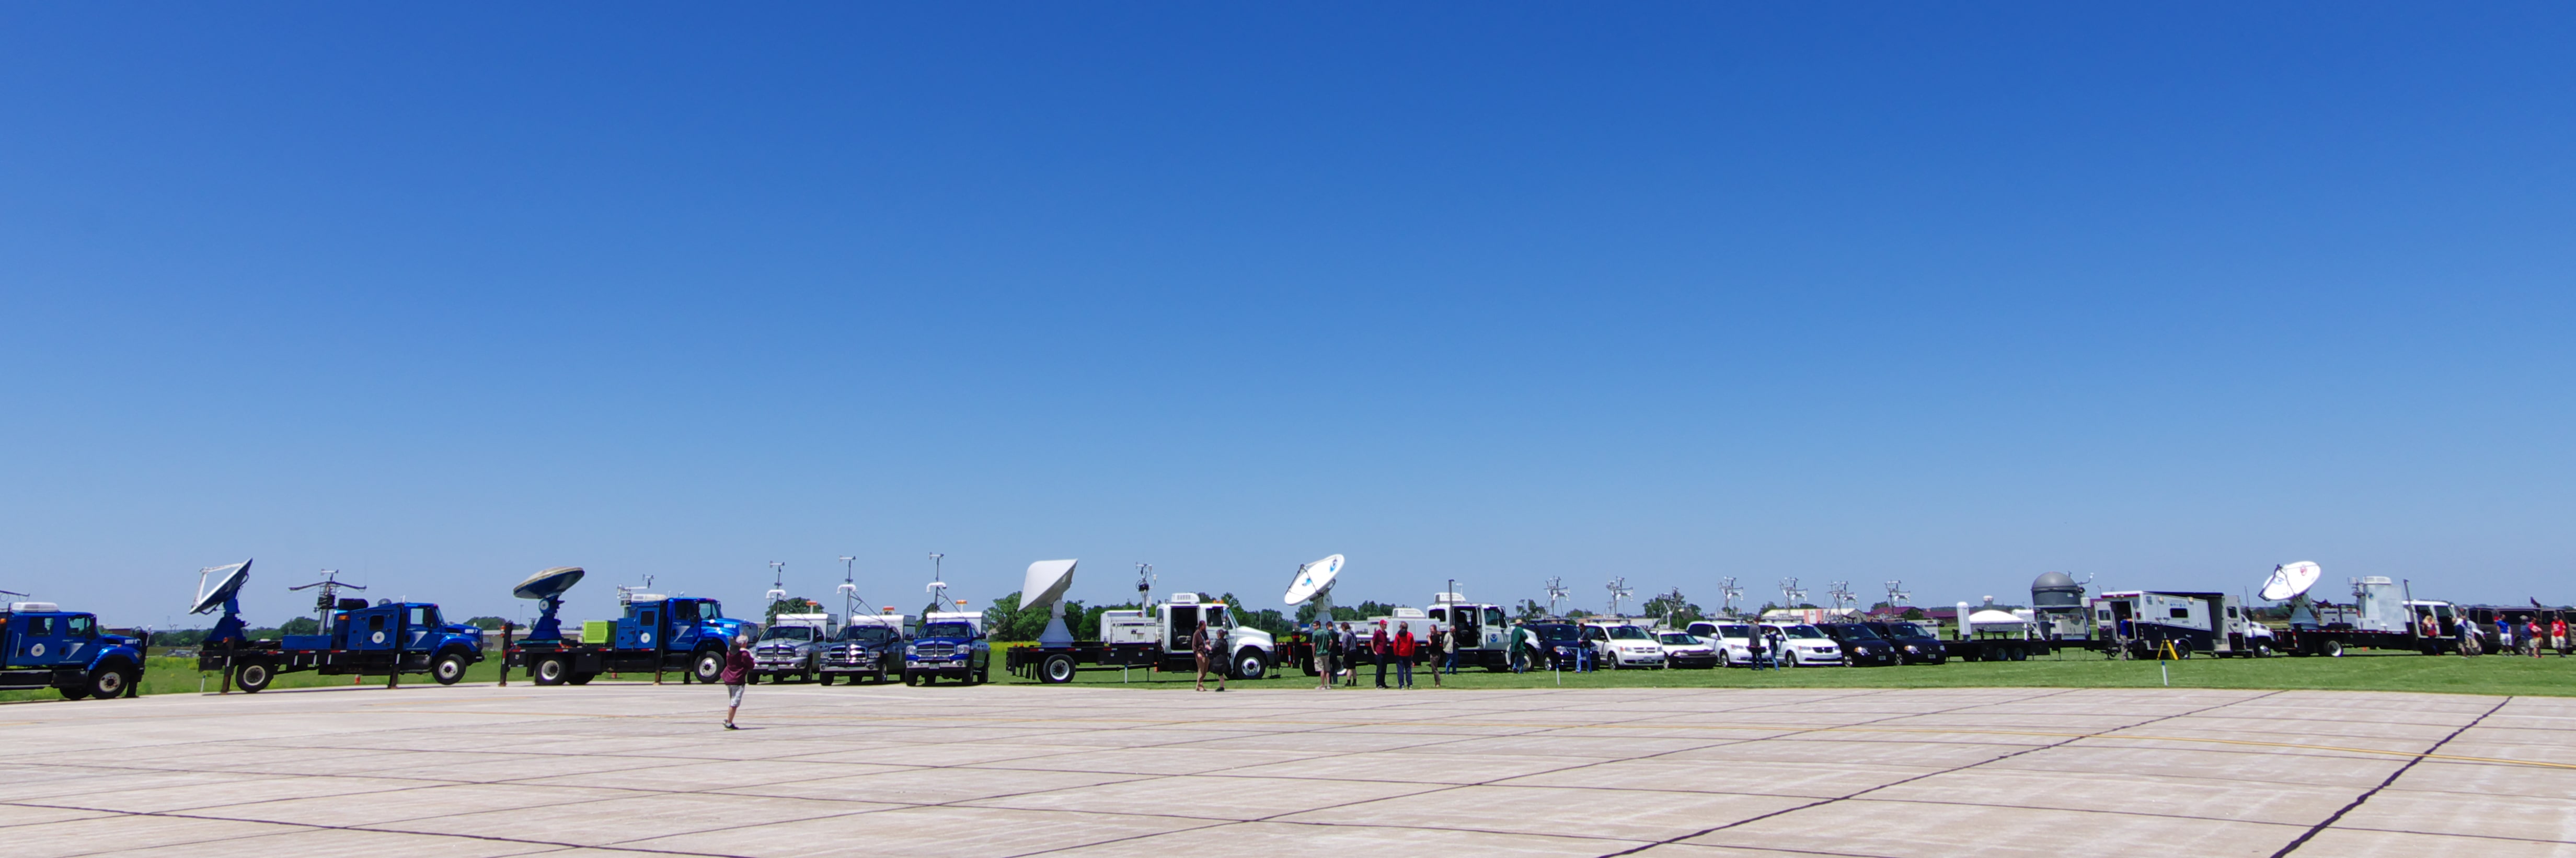 Research Vehicles for the PECAN field experiment are parked in a long row, with an assortment of people standing outside the vehicles.